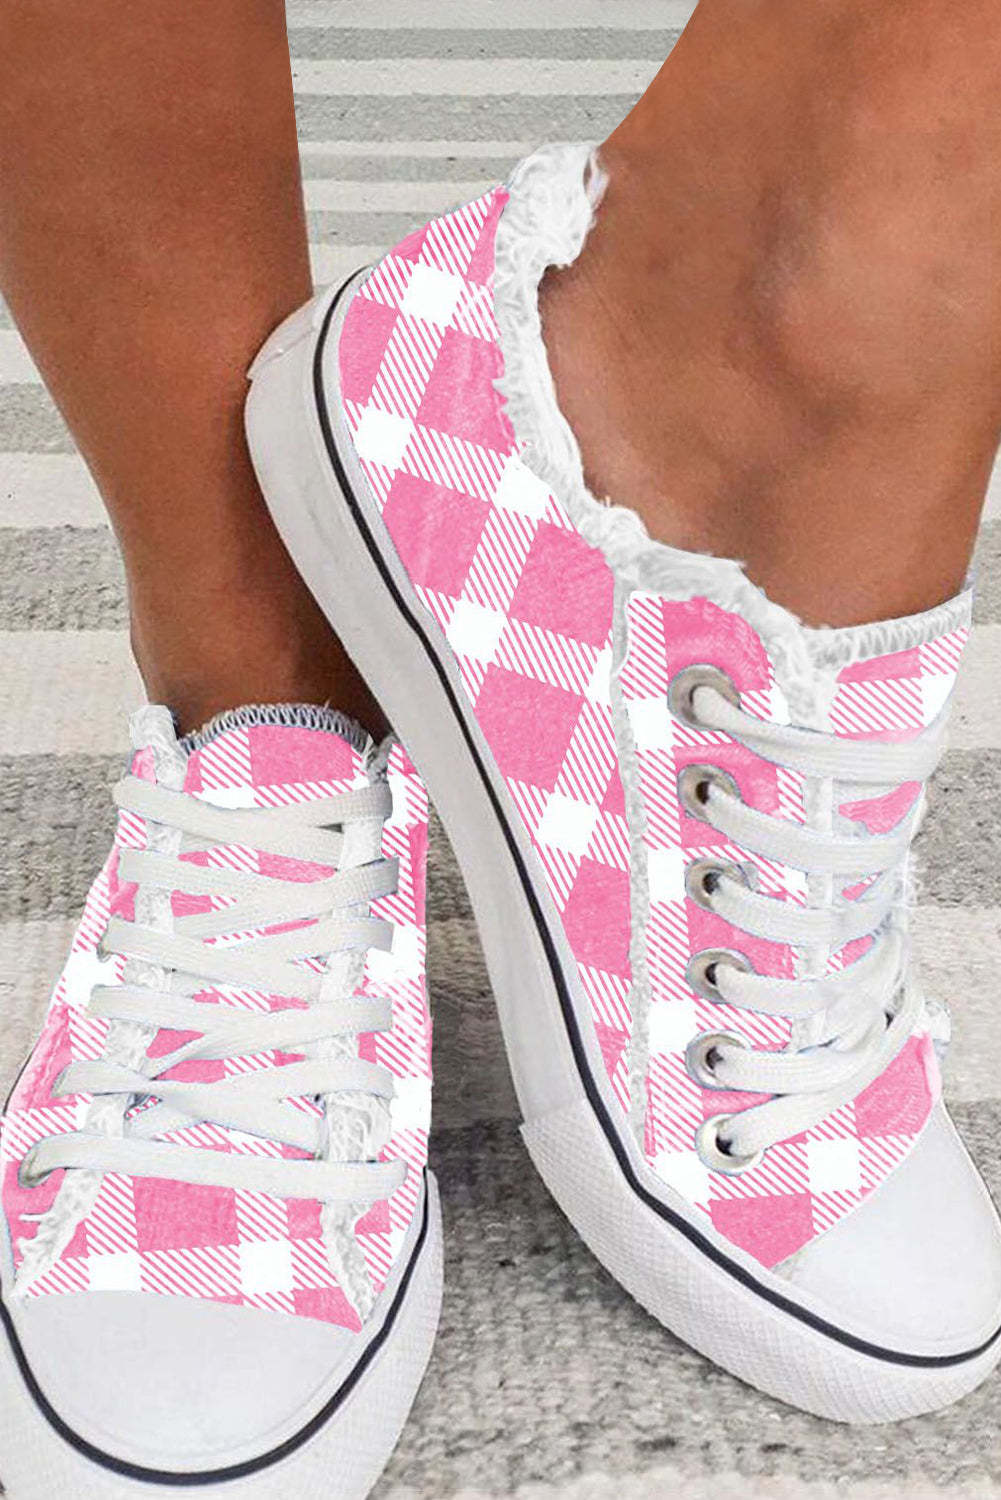 Pink Plaid Stripe Graphic Lace-Up Canvas Shoes $ 29.99 - Evaless